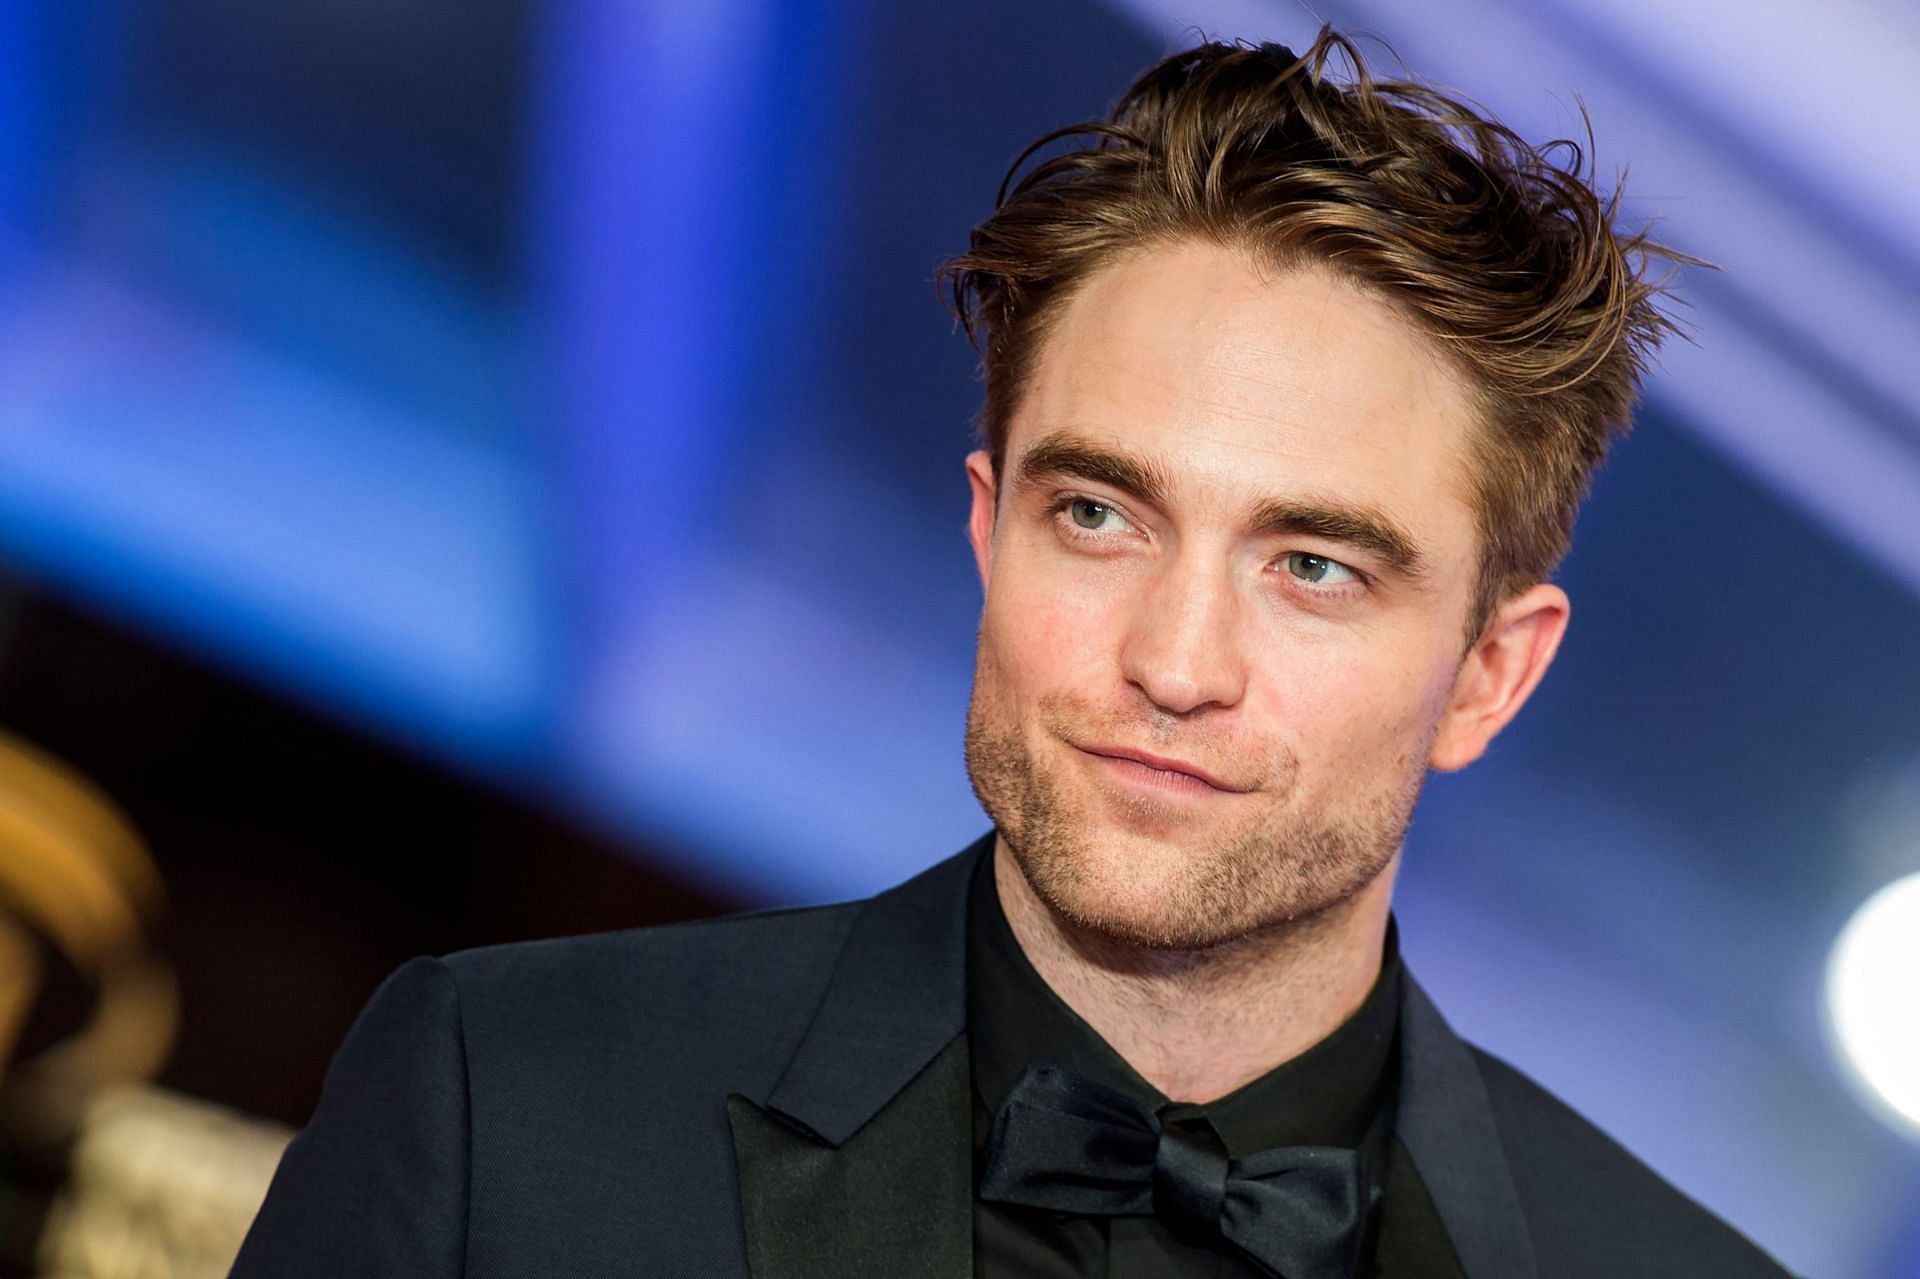 Social media users reacted to Pattinson